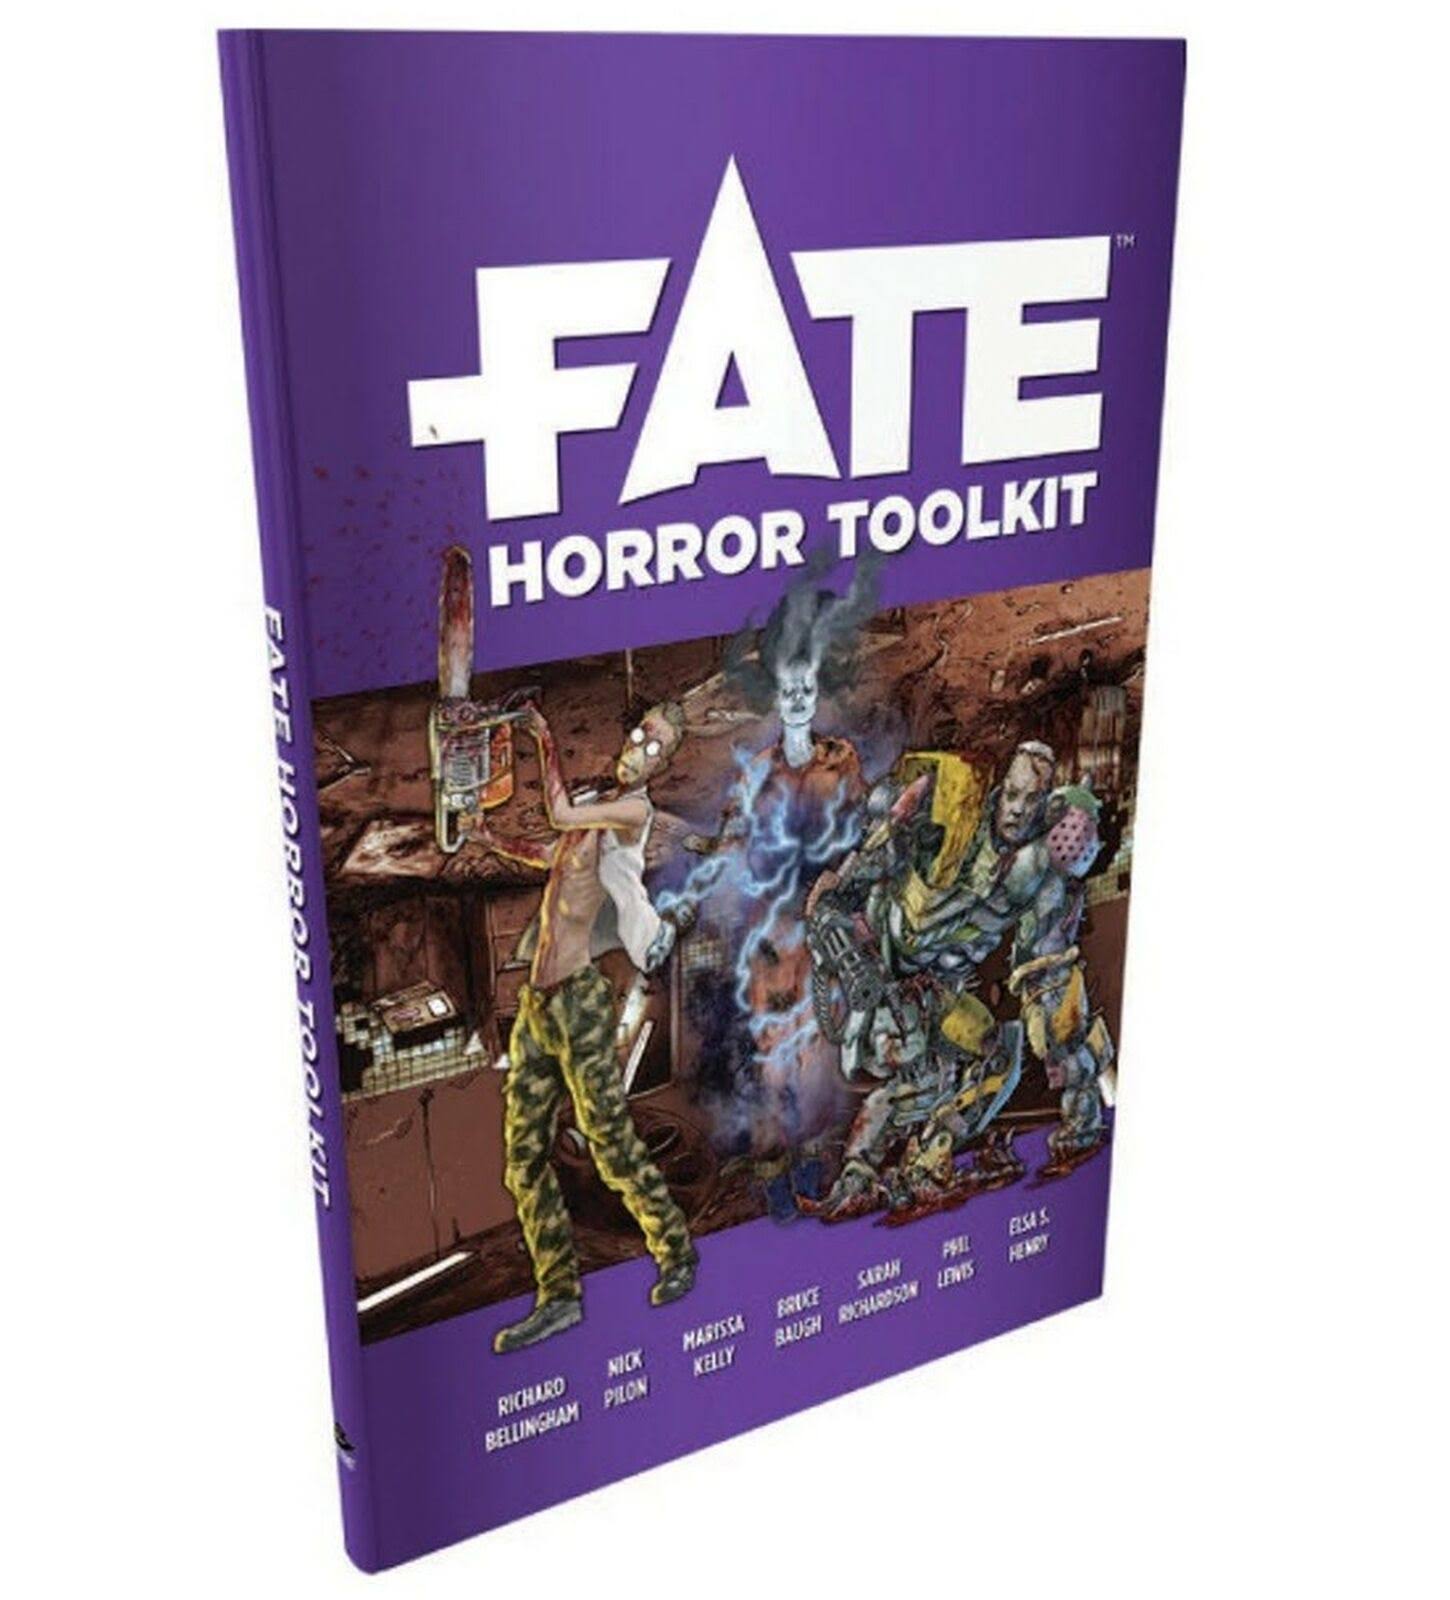 Evil Hat Productions EHP0039 Fate Horror Toolkit Supp, Multicoloured